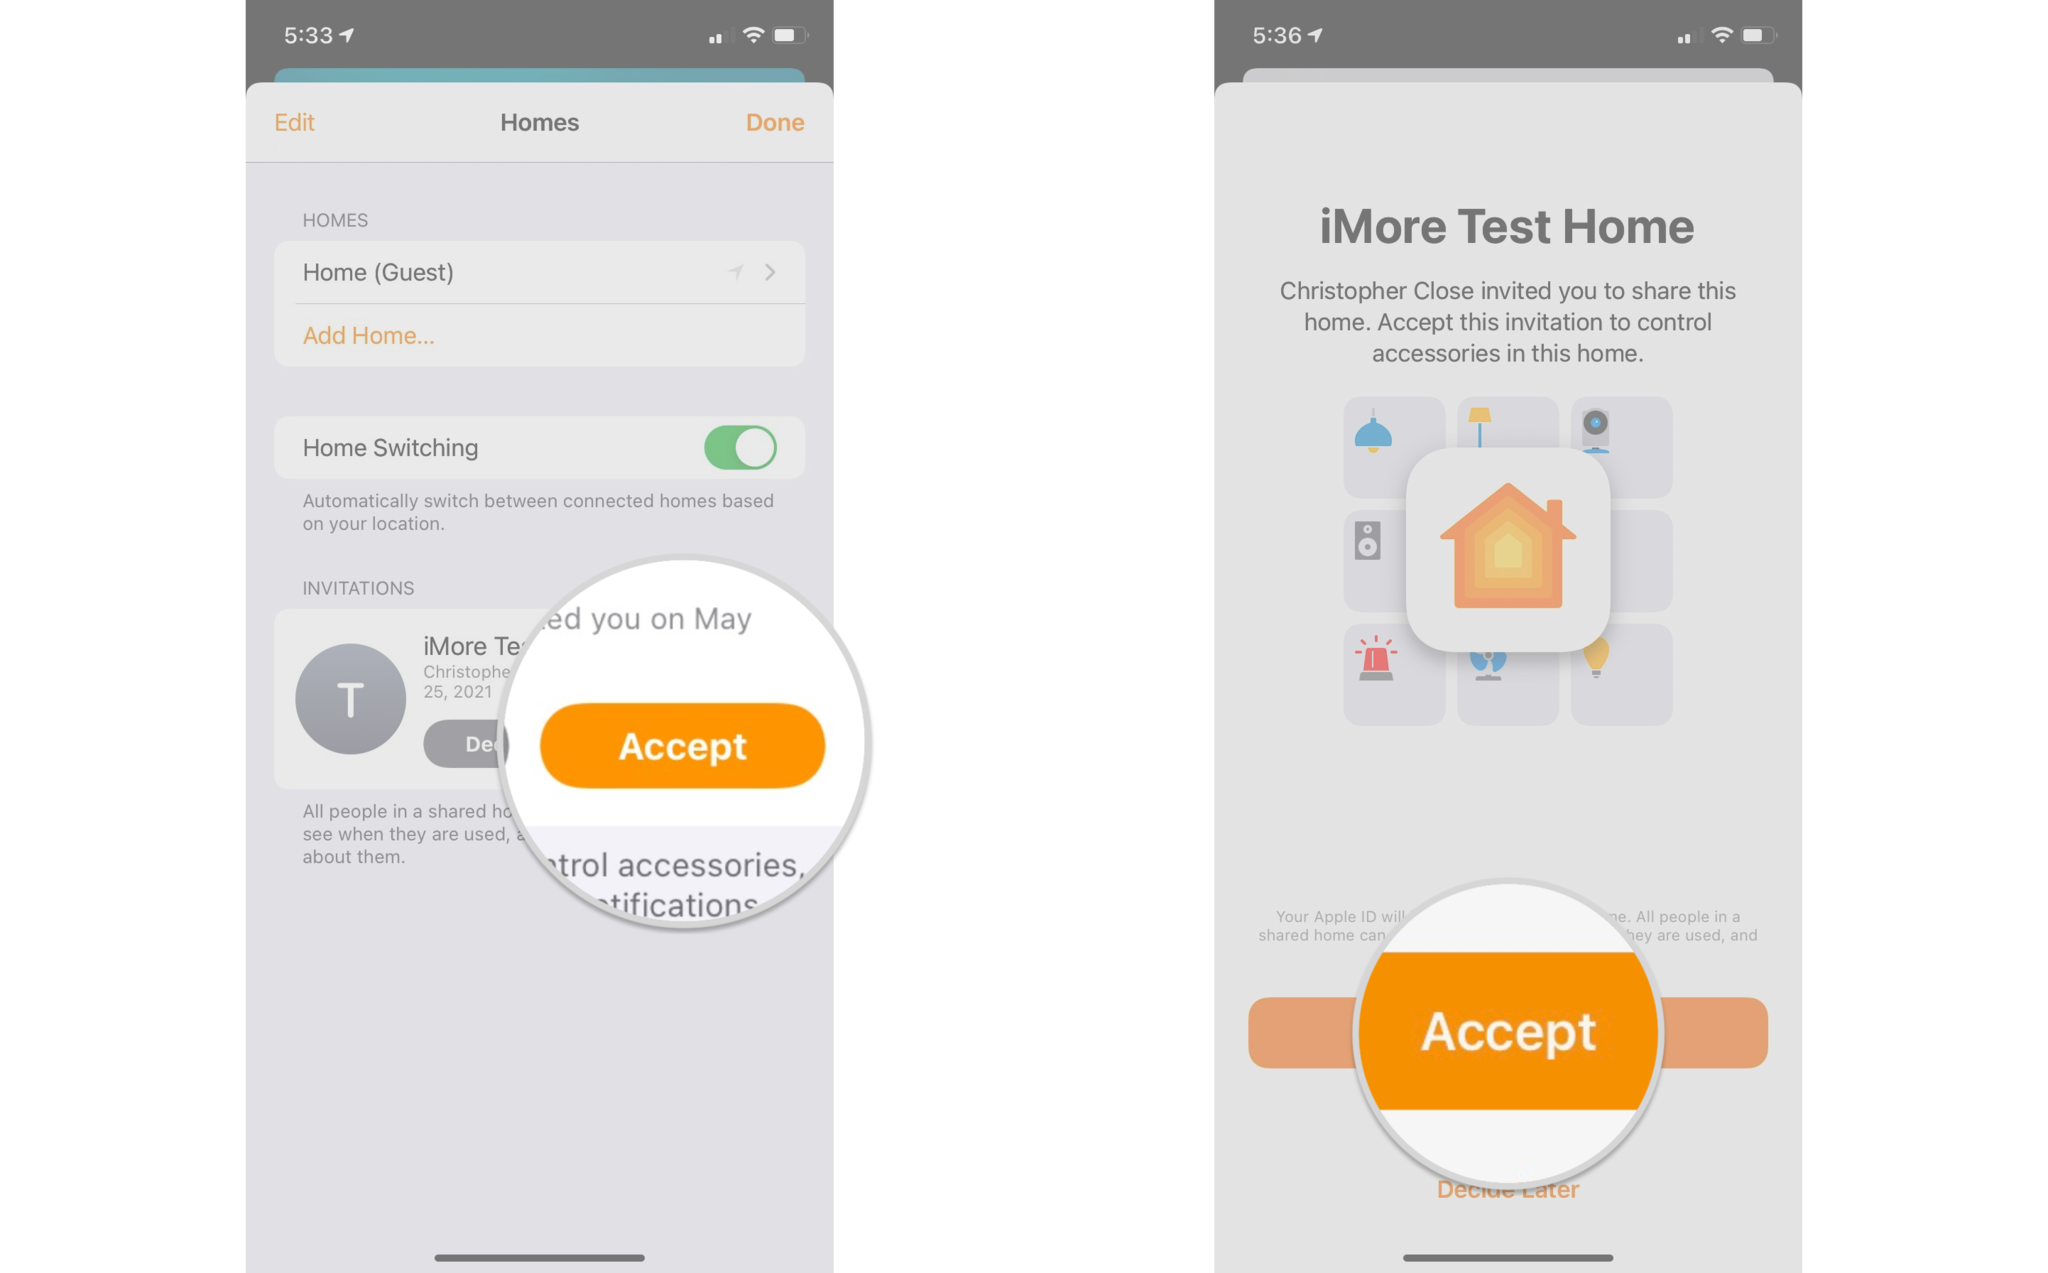 How to accept an invite in the Home app by showing steps on an iPhone: Tap Accept, Tap Accept to join the home